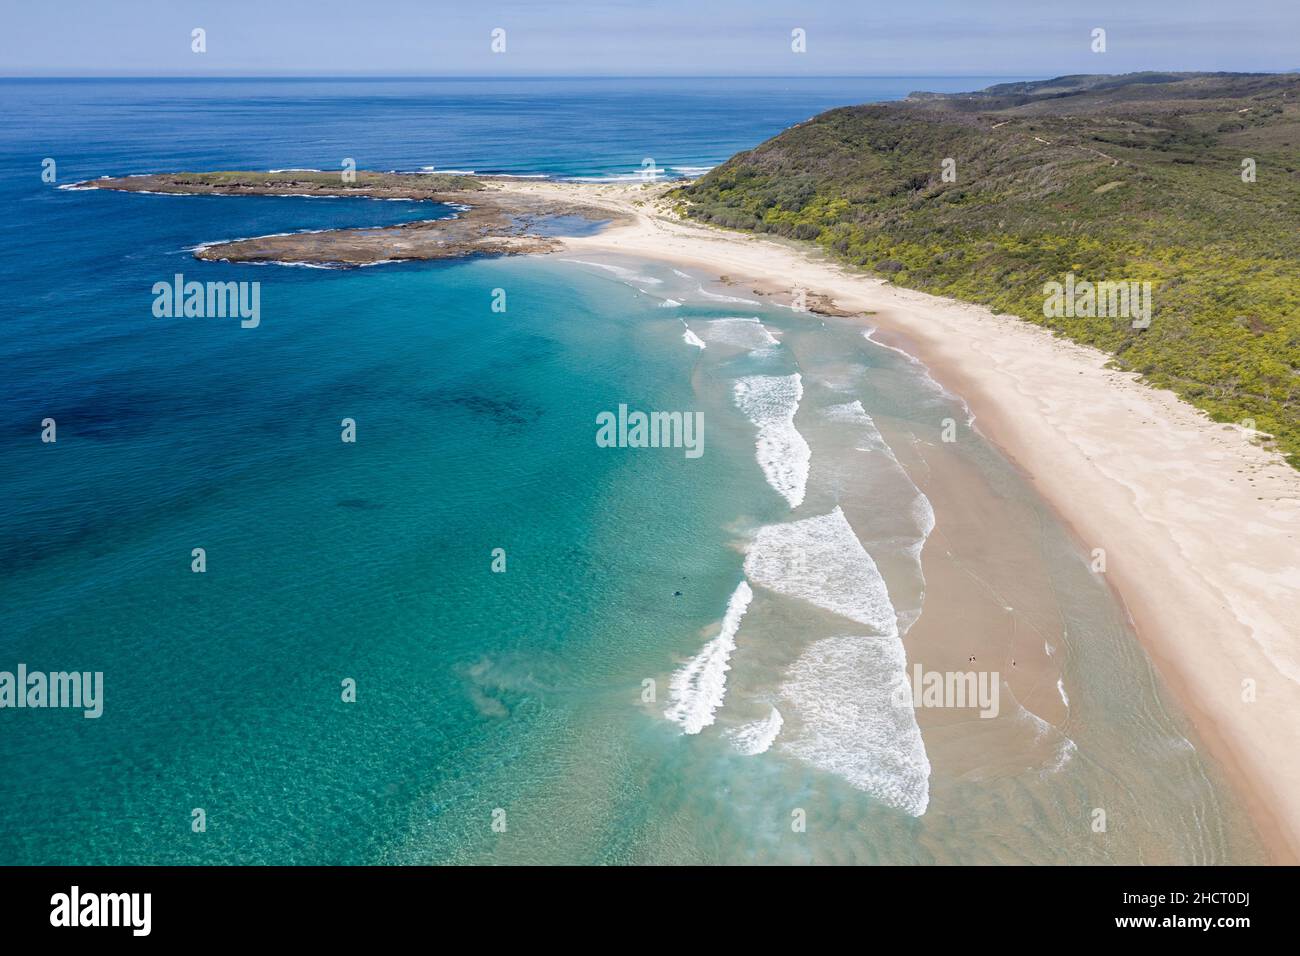 Aerial view of beautiful Moonee beach at Catherine Hill Bay on the Central Coast of NSW Australia Stock Photo